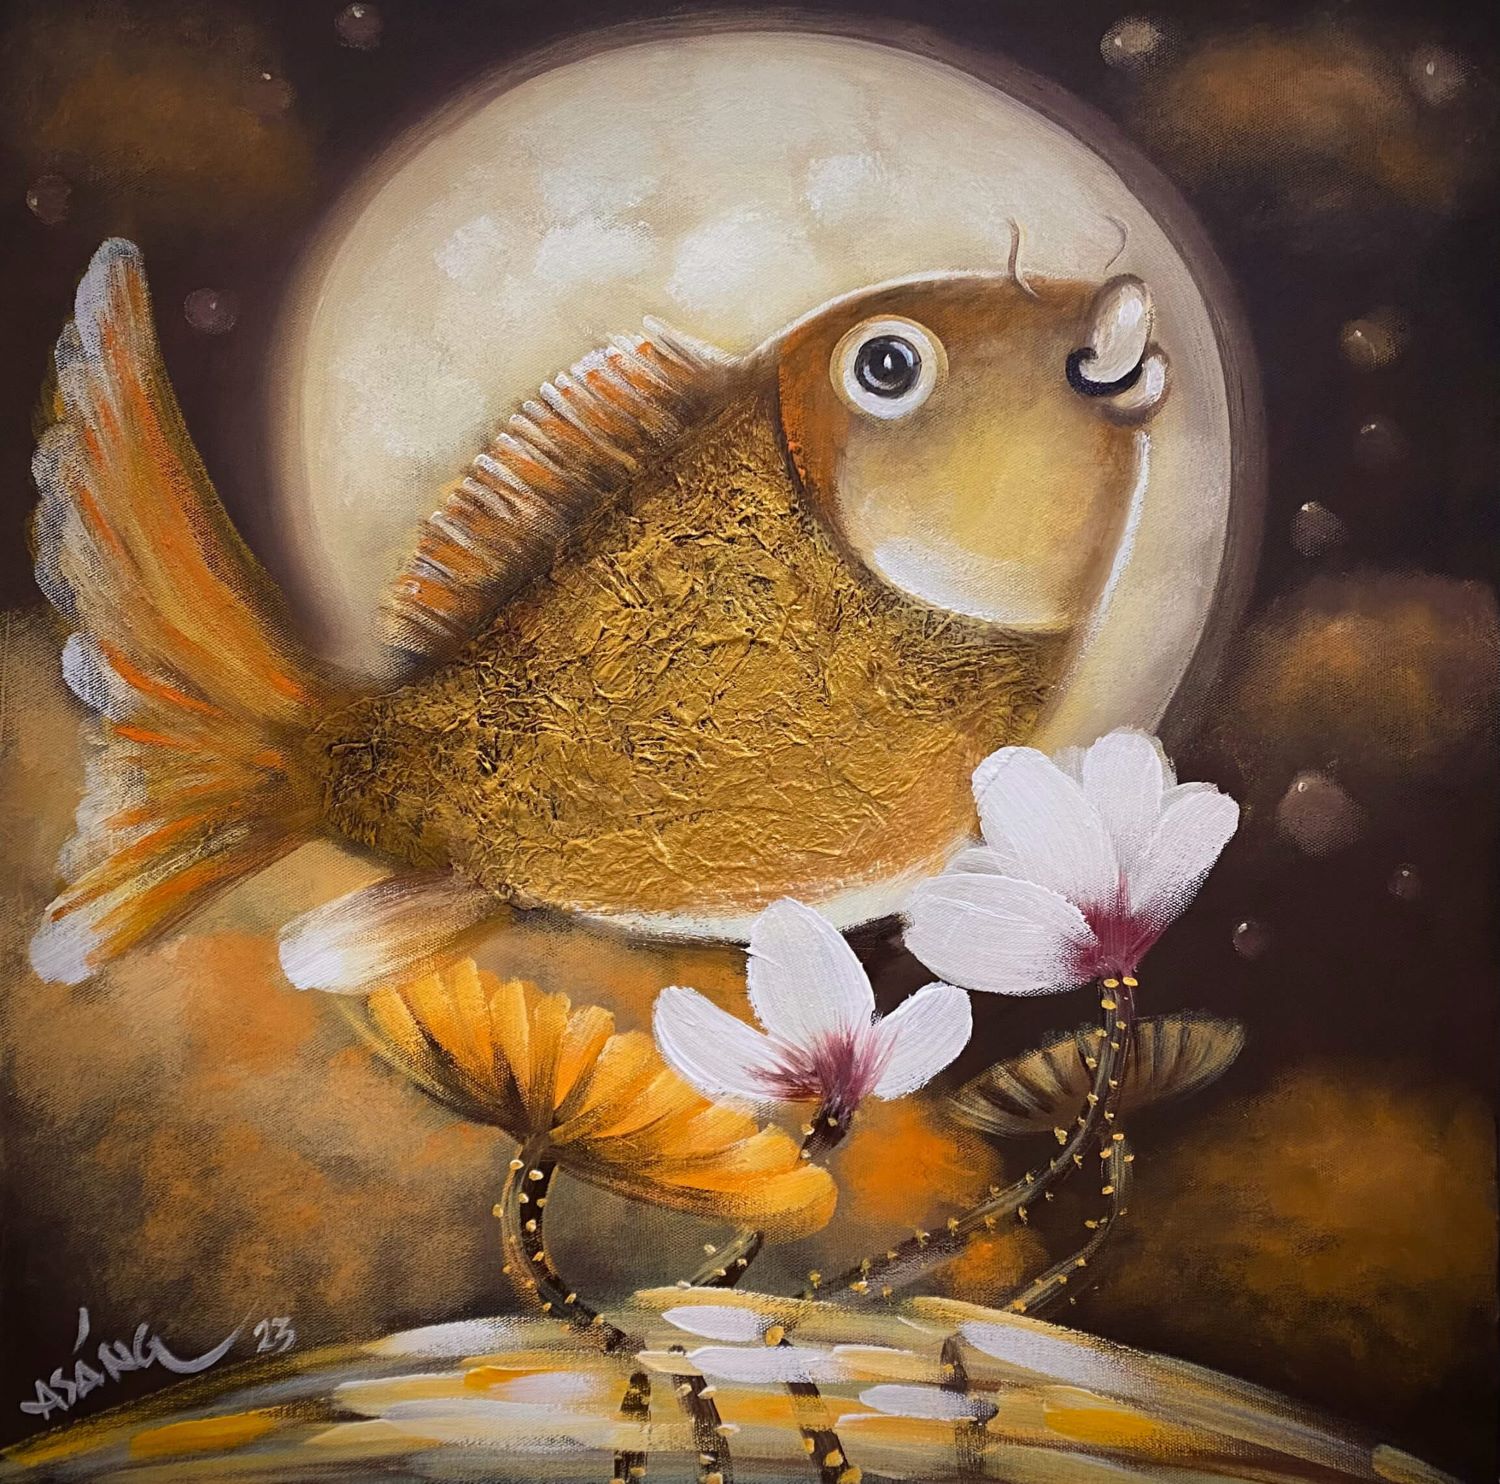 Carp in the Moonlight - Vietnamese Oil Painting by Artist Hoang A Sang